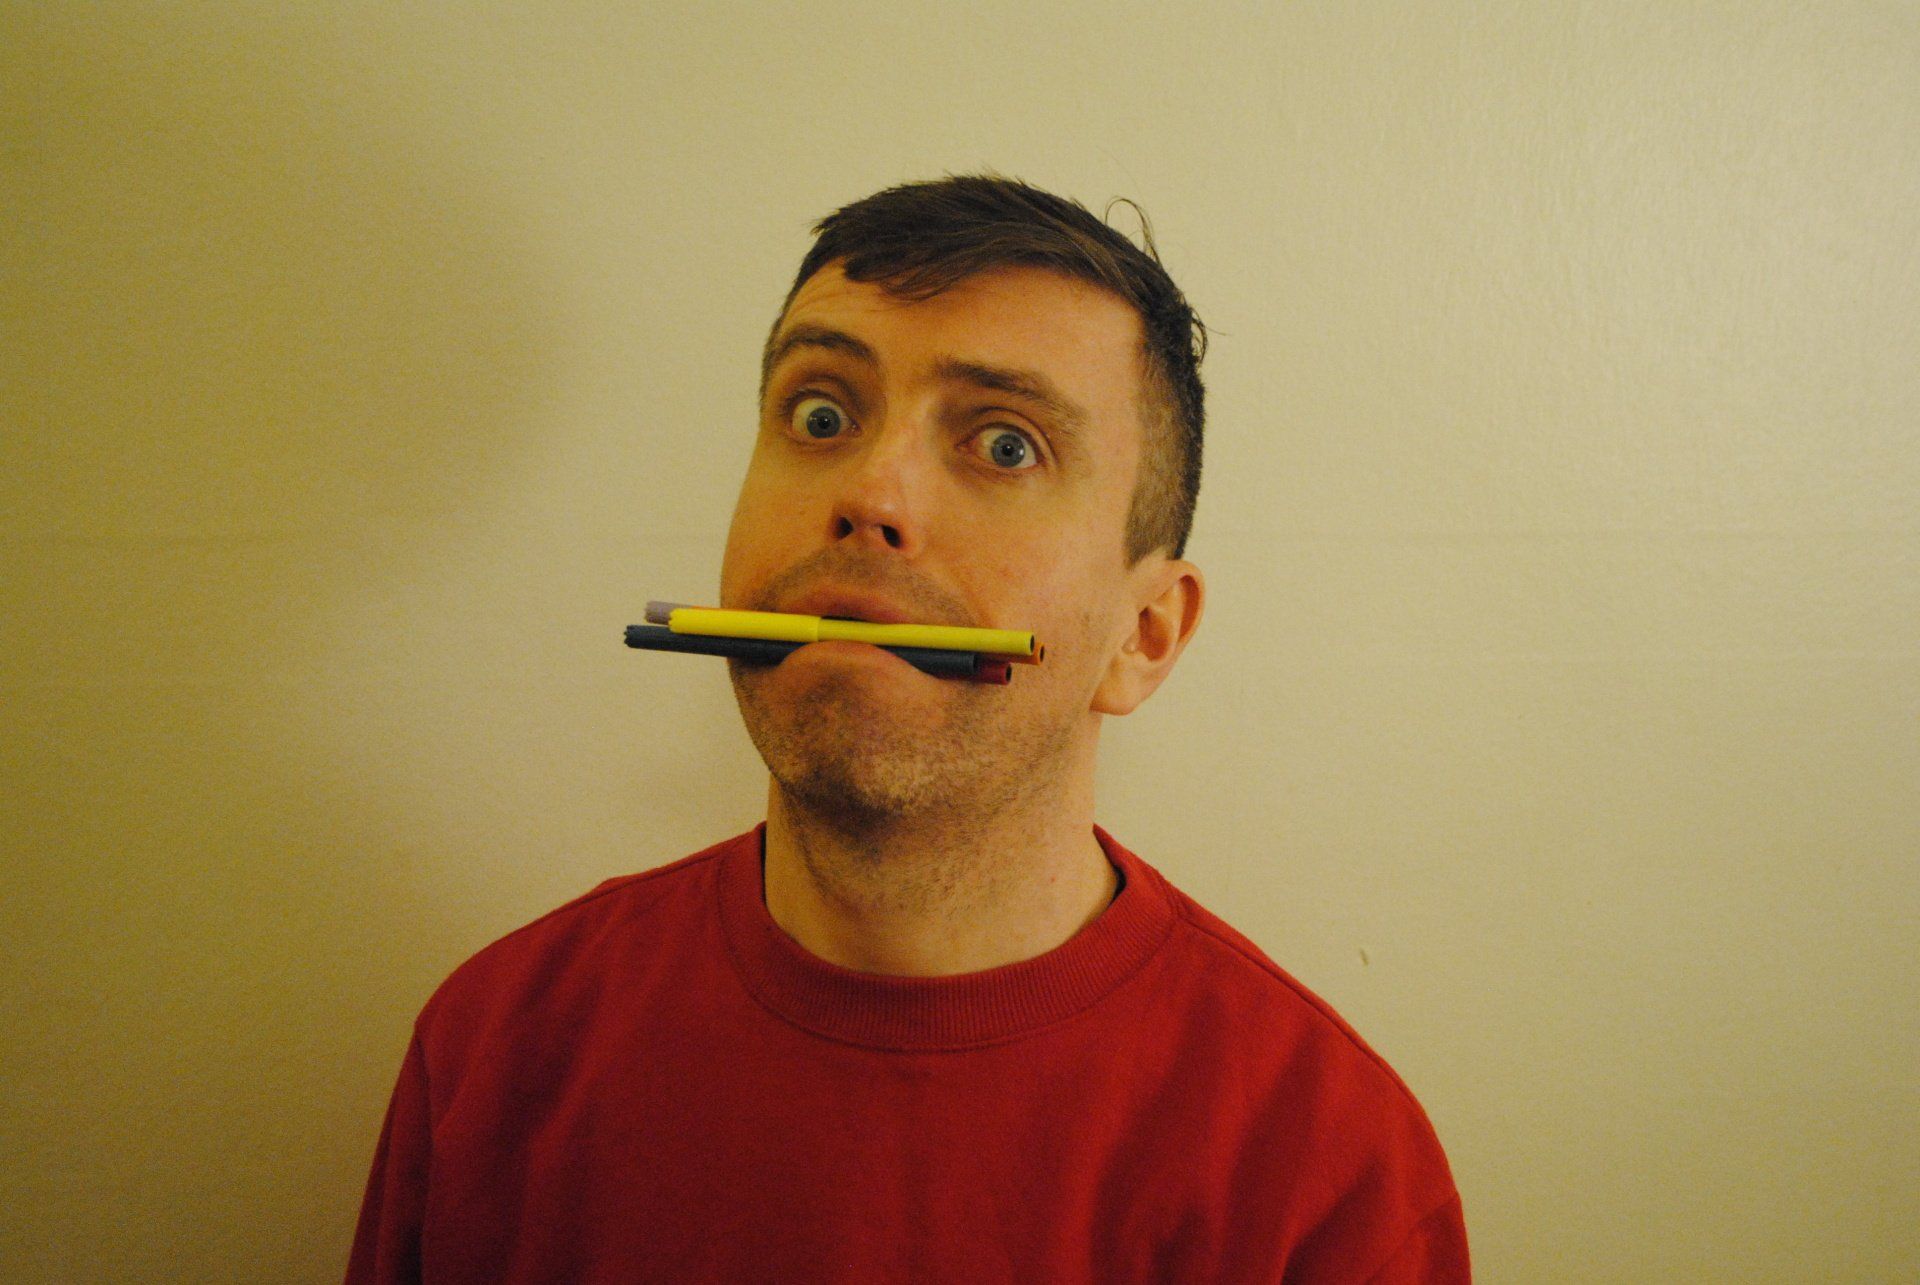 a man in a red sweater is holding a pen in his mouth .